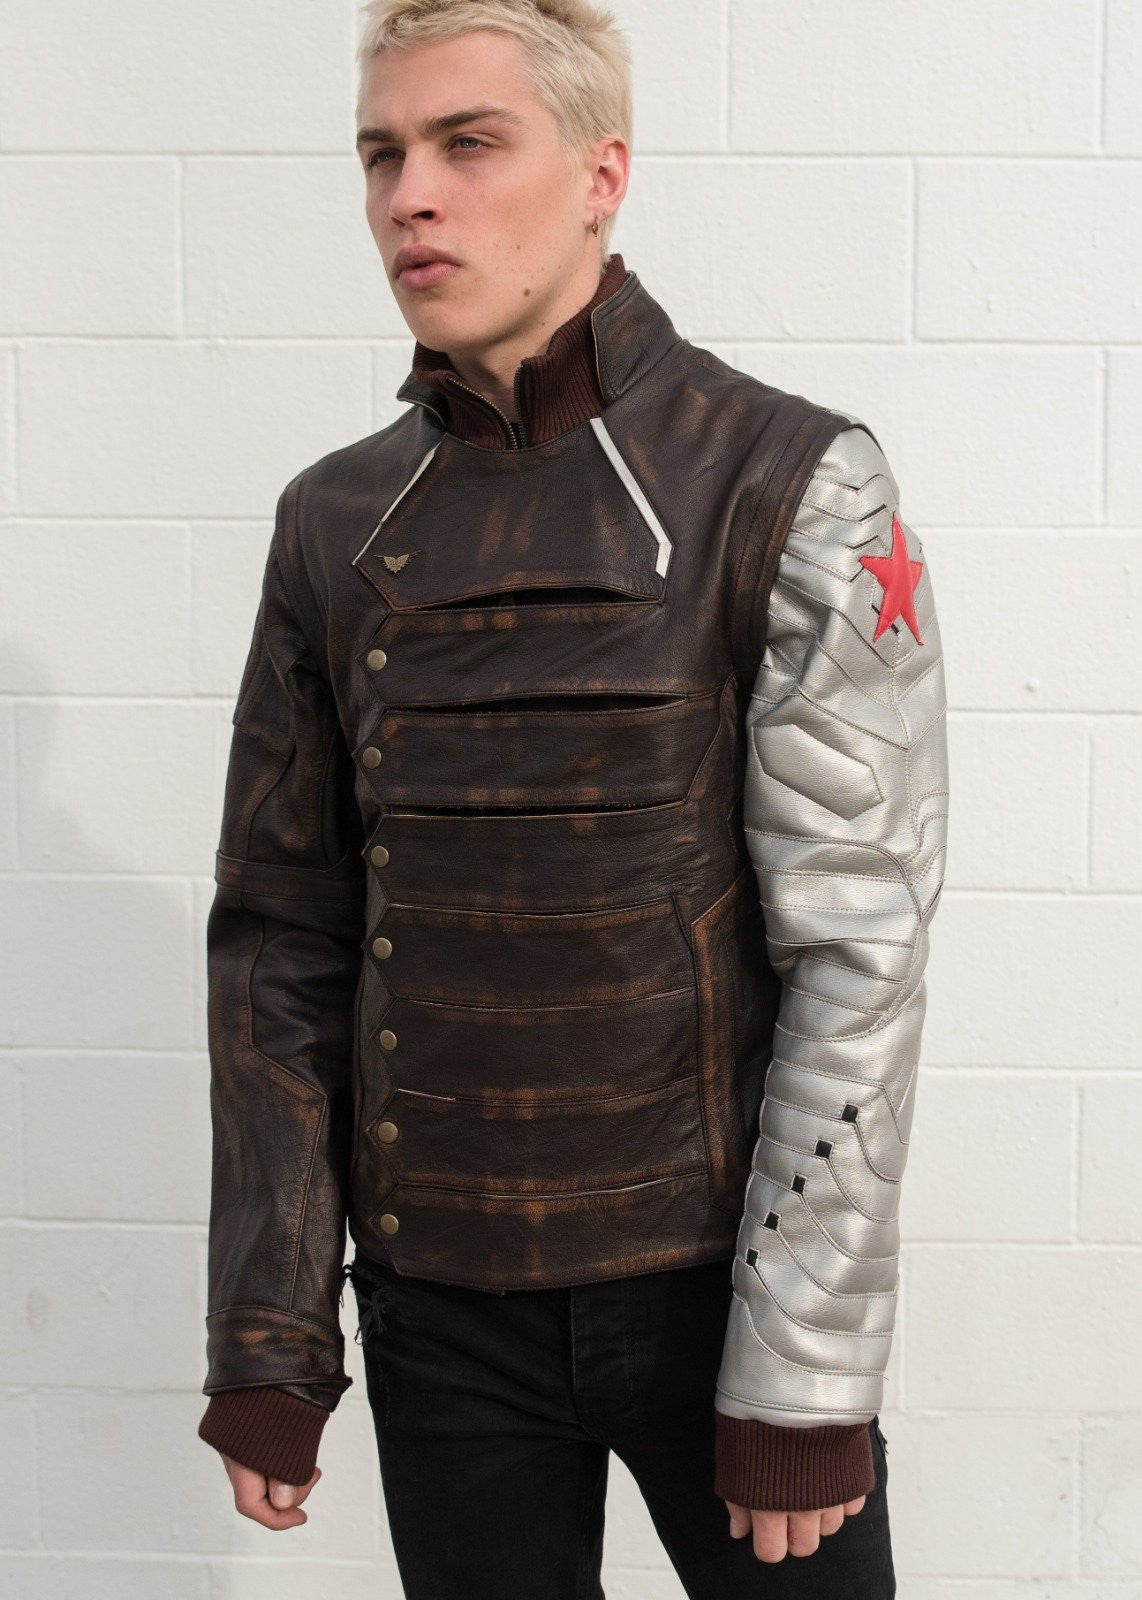 Mens Bucky Barnes Winter Soldier Armored Leather Jacket